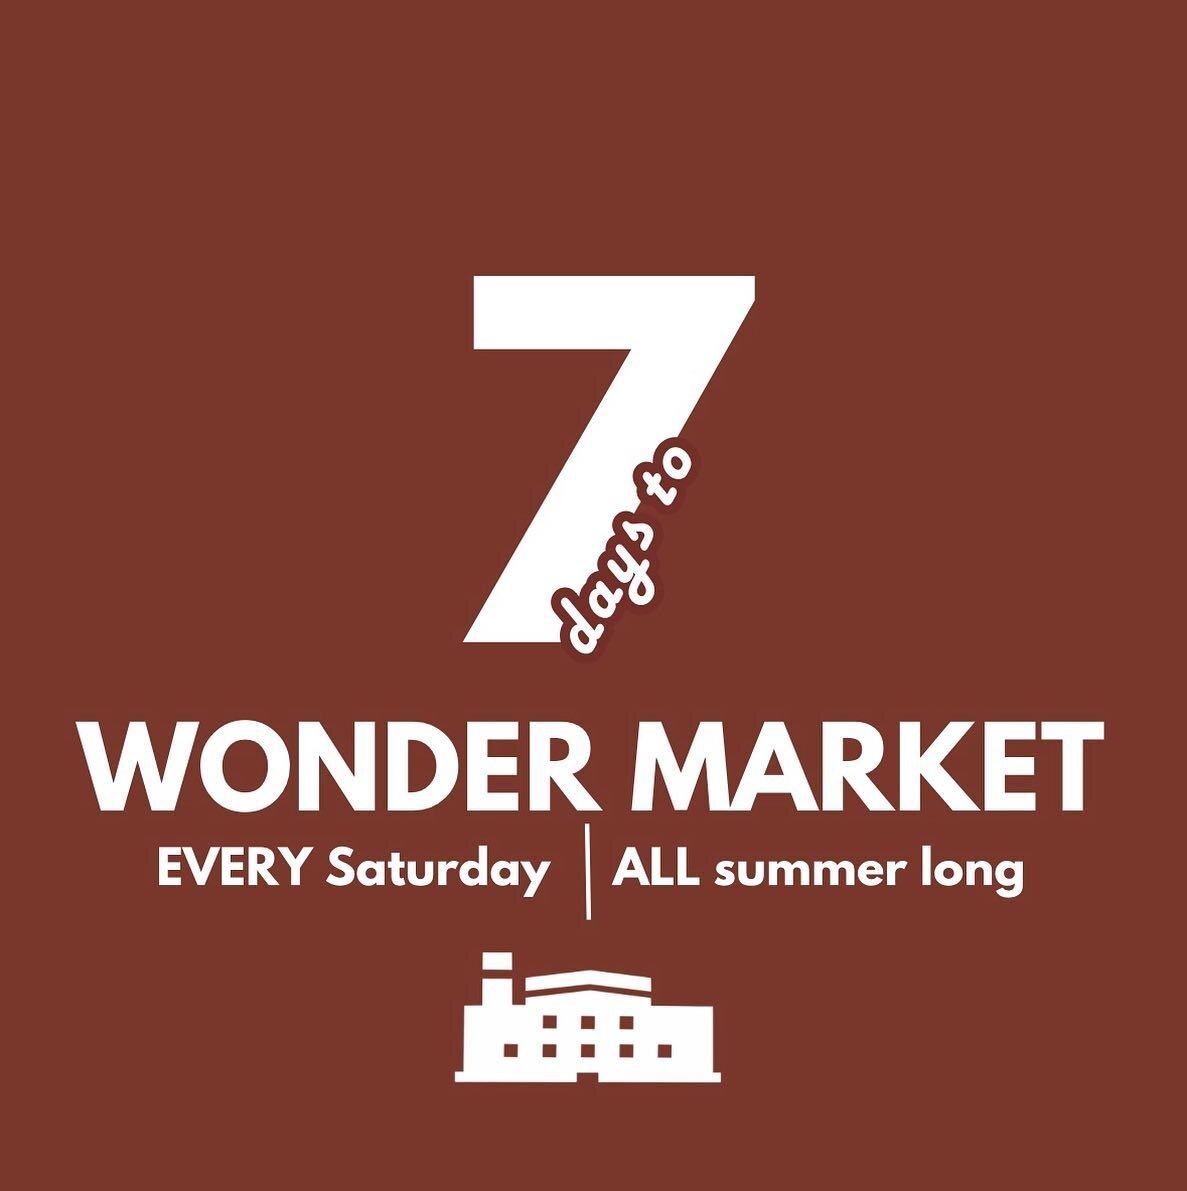 We have entered the FINAL WEEK until our Wonder Market is back for Summer 2023!

We are so excited to host tons of local vendors including food, farmers, artists and so much more for you again this year! 

Mark your calendars for NEXT SATURDAY to com